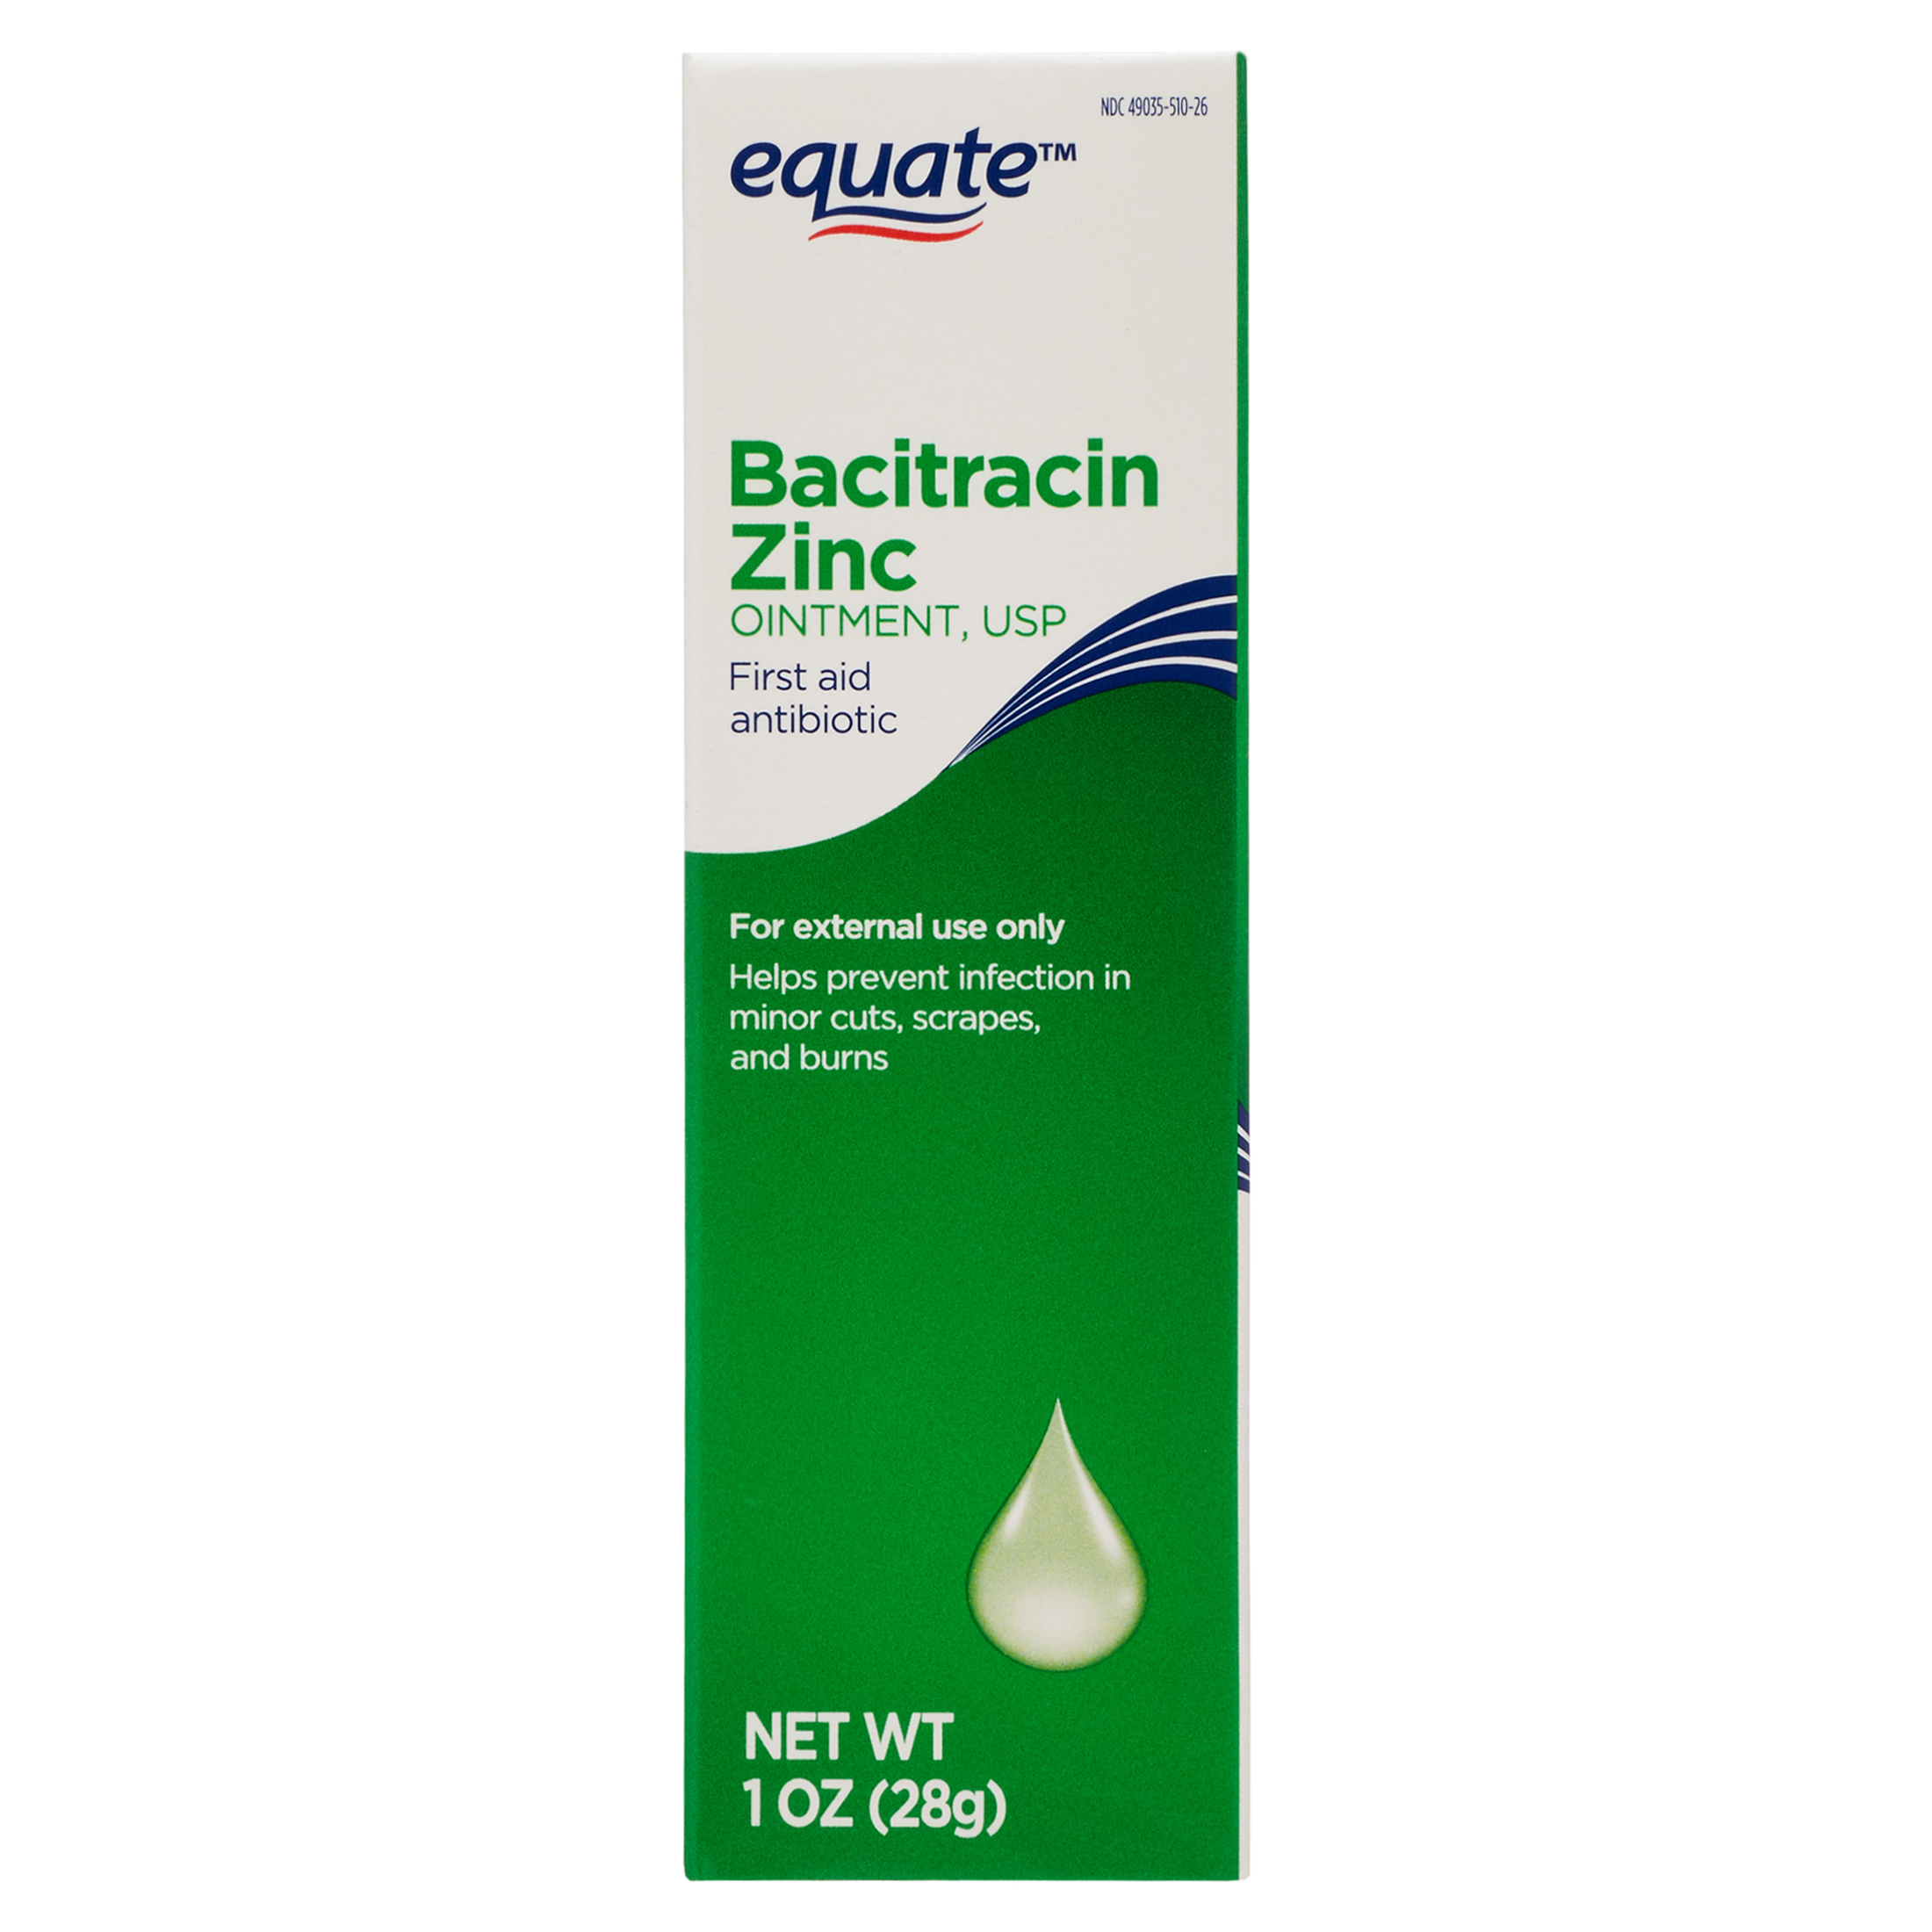 Equate Bacitracin Zinc USP Ointment, First Aid Antibiotic, 1 oz - image 1 of 8